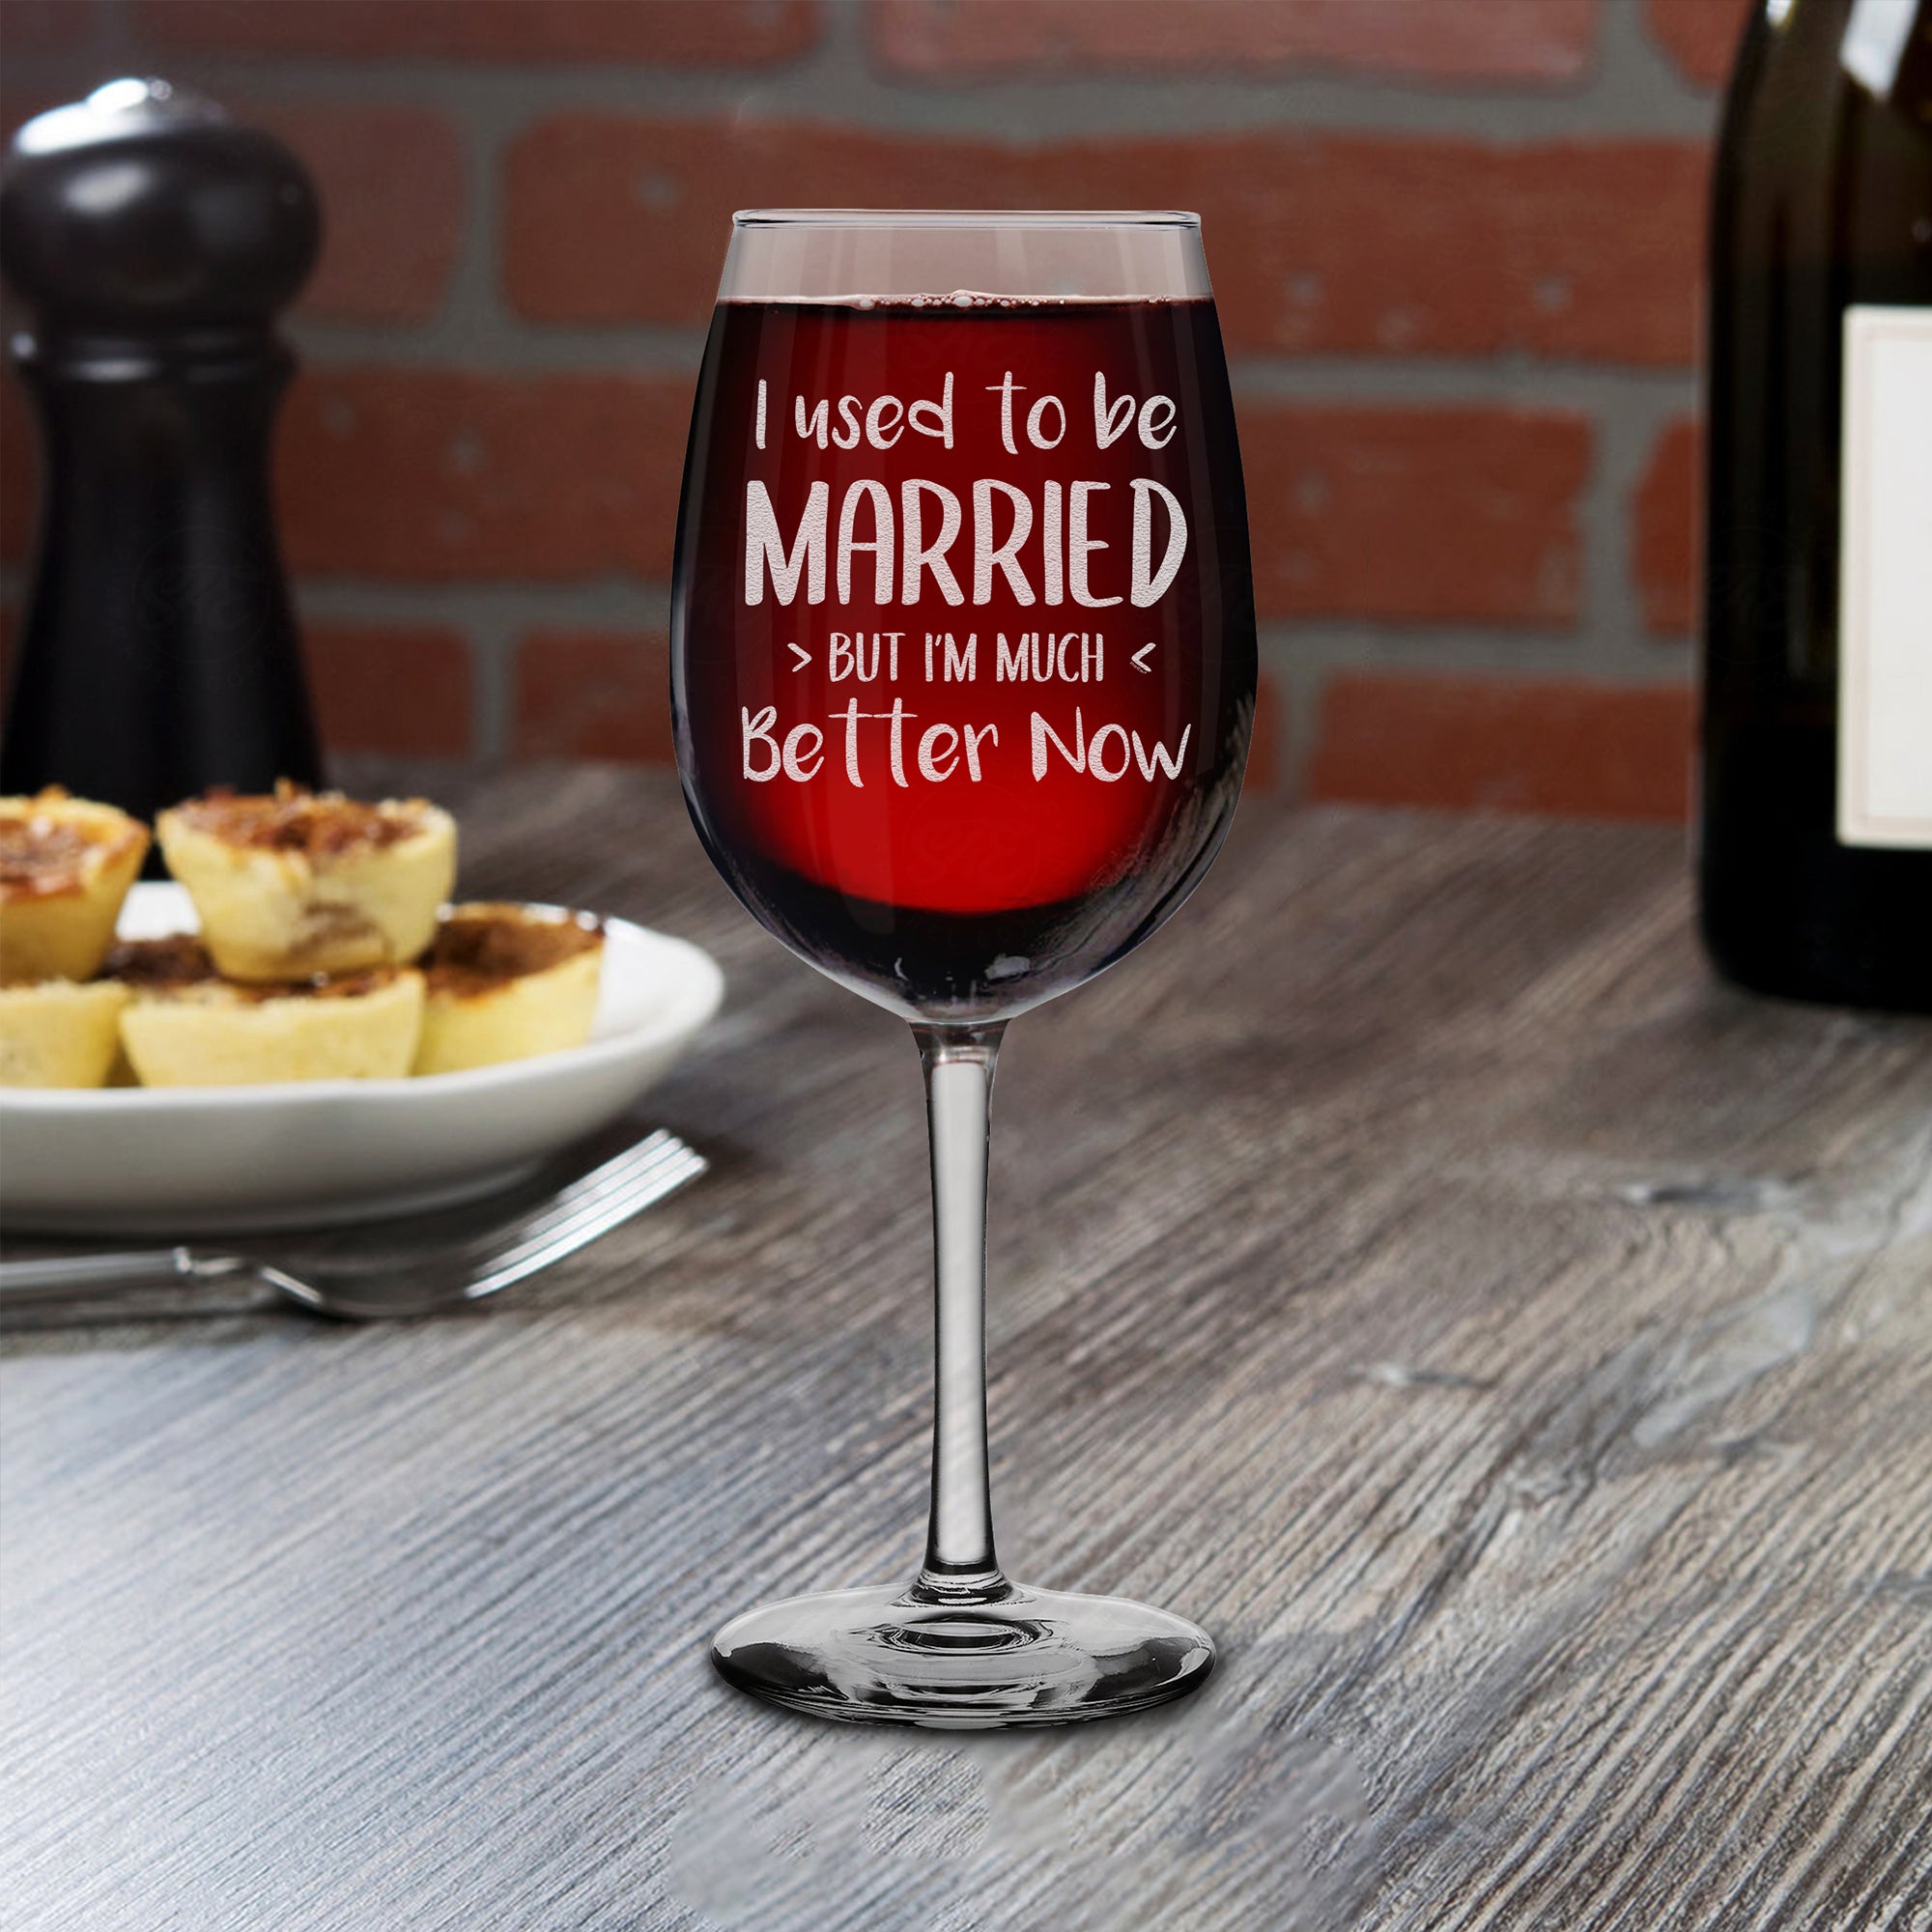 I Used To Be Married But I'm Much Better Now Engraved Stemmed Wine Glass Funny Gift for Divorcee Divorce Party (16 oz.)